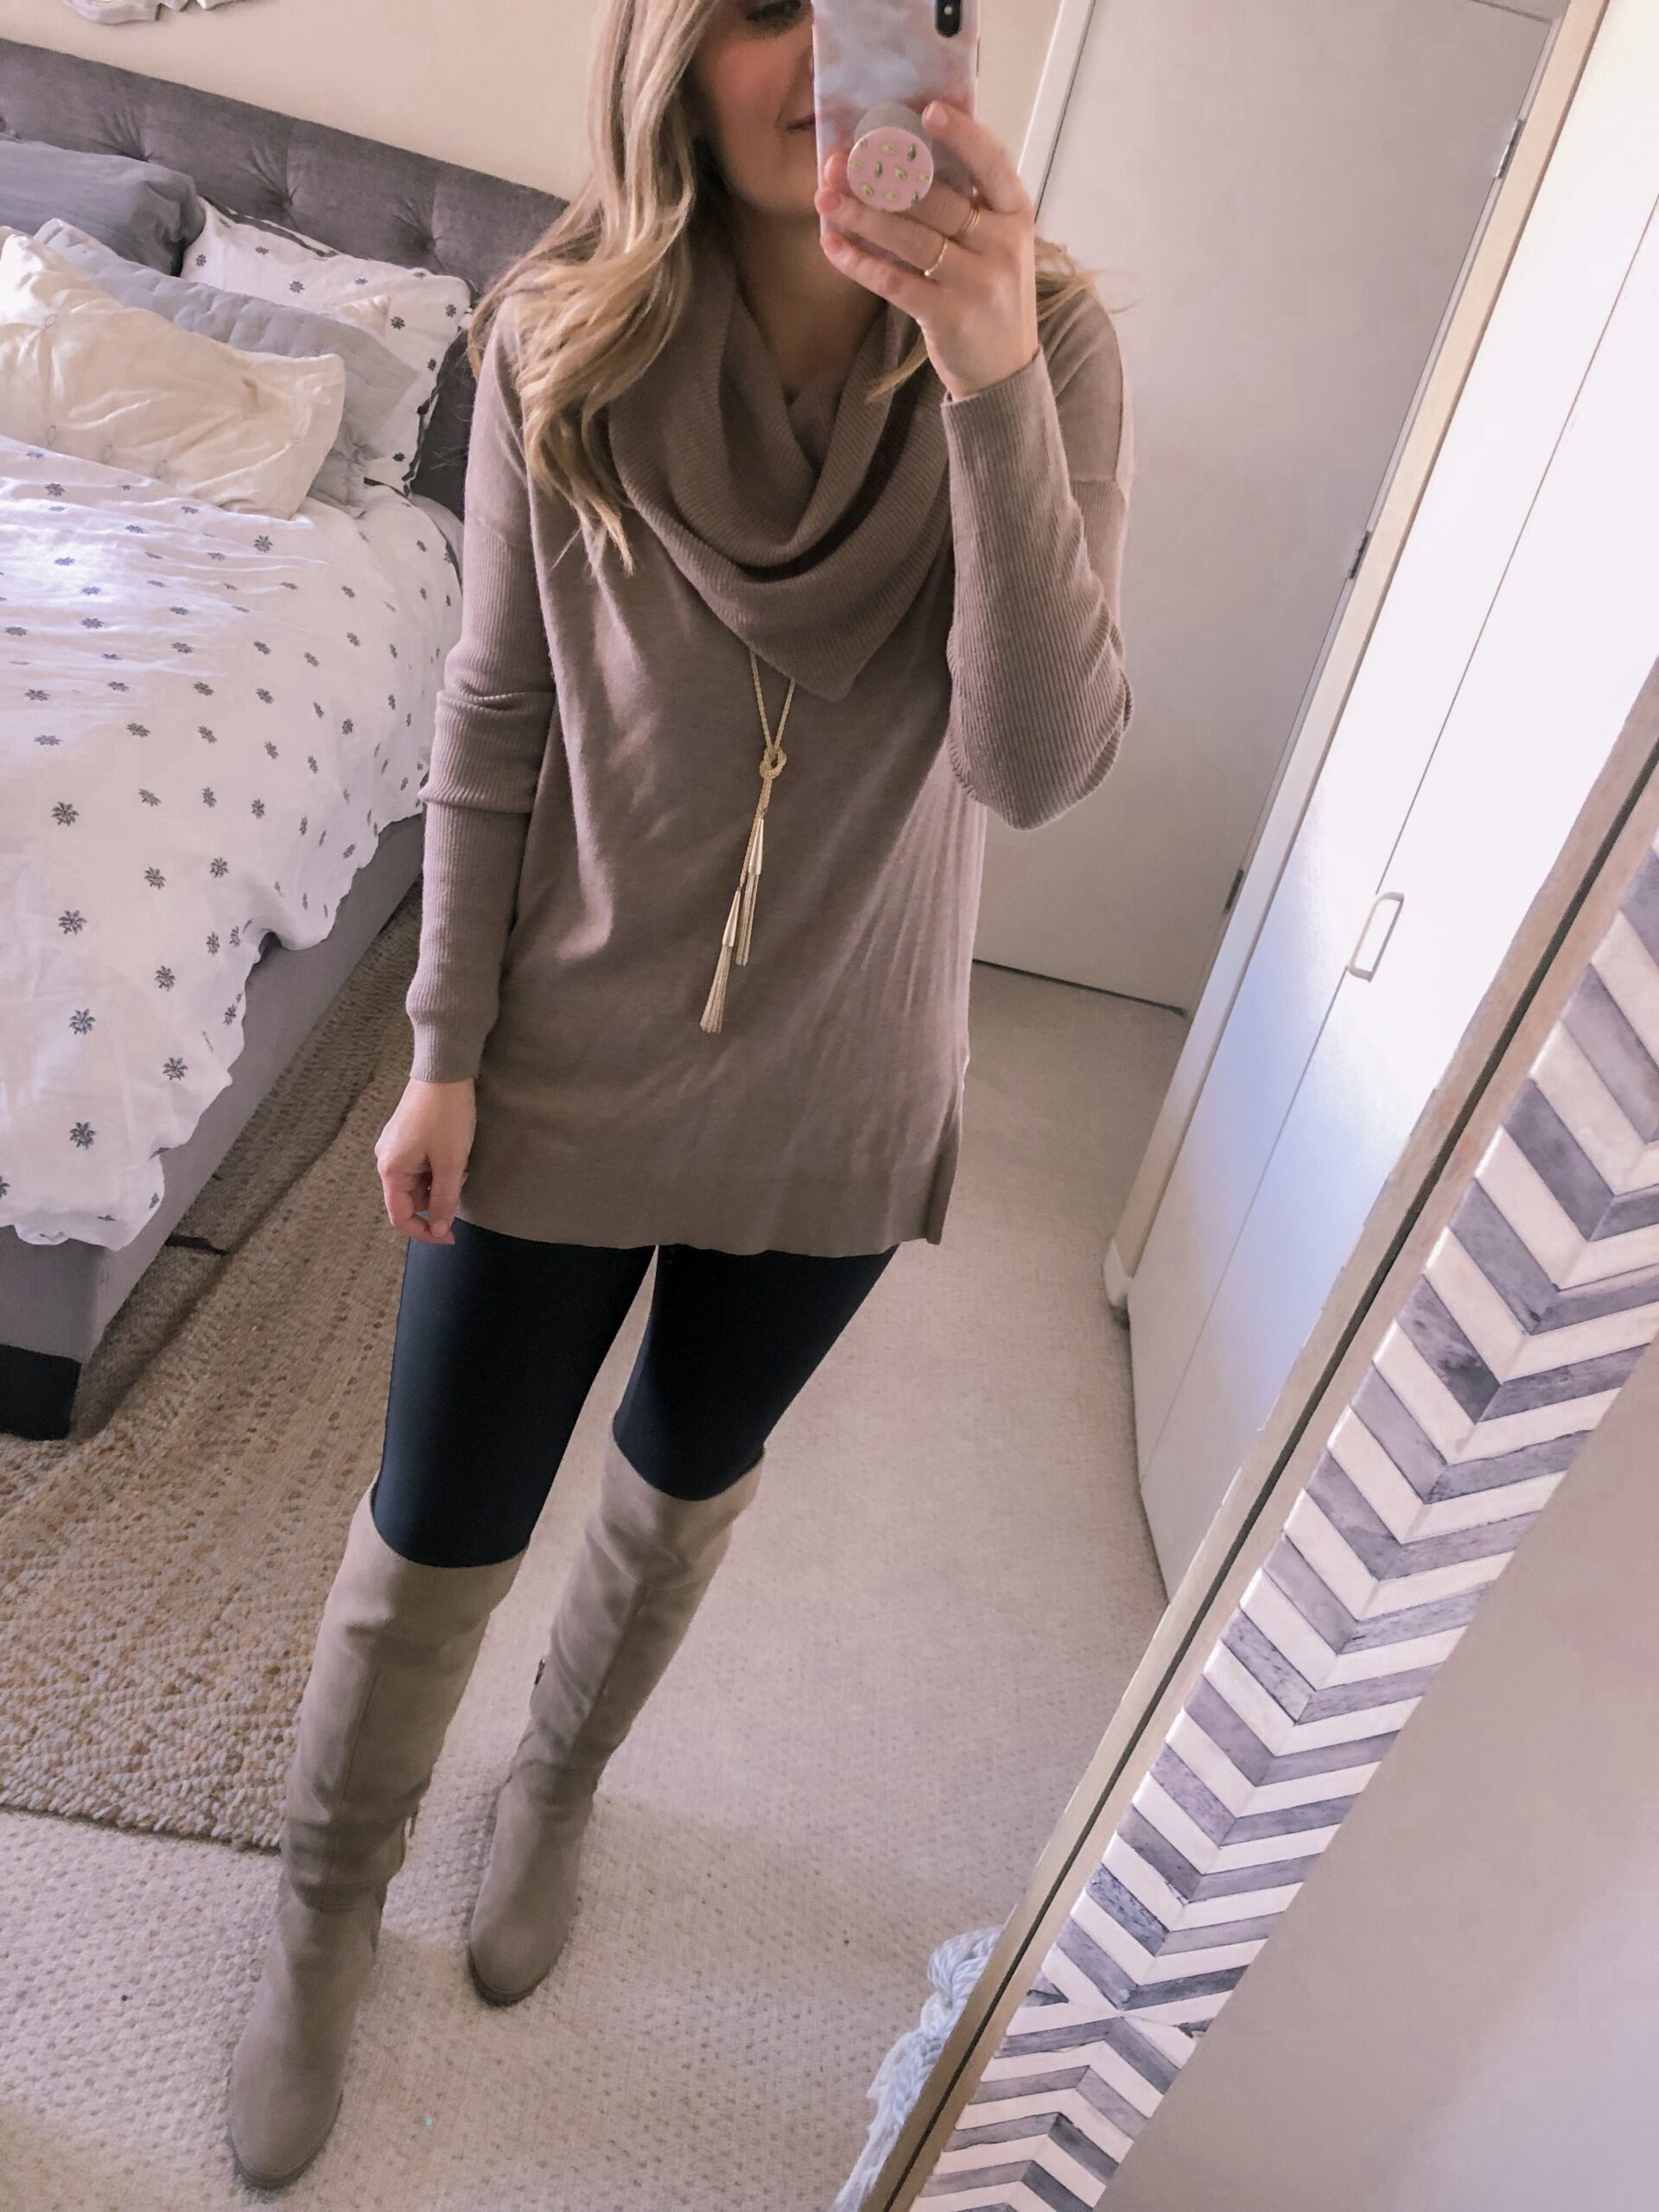 Cowl Neck Sweater Outfit Ideas
  for Ladies